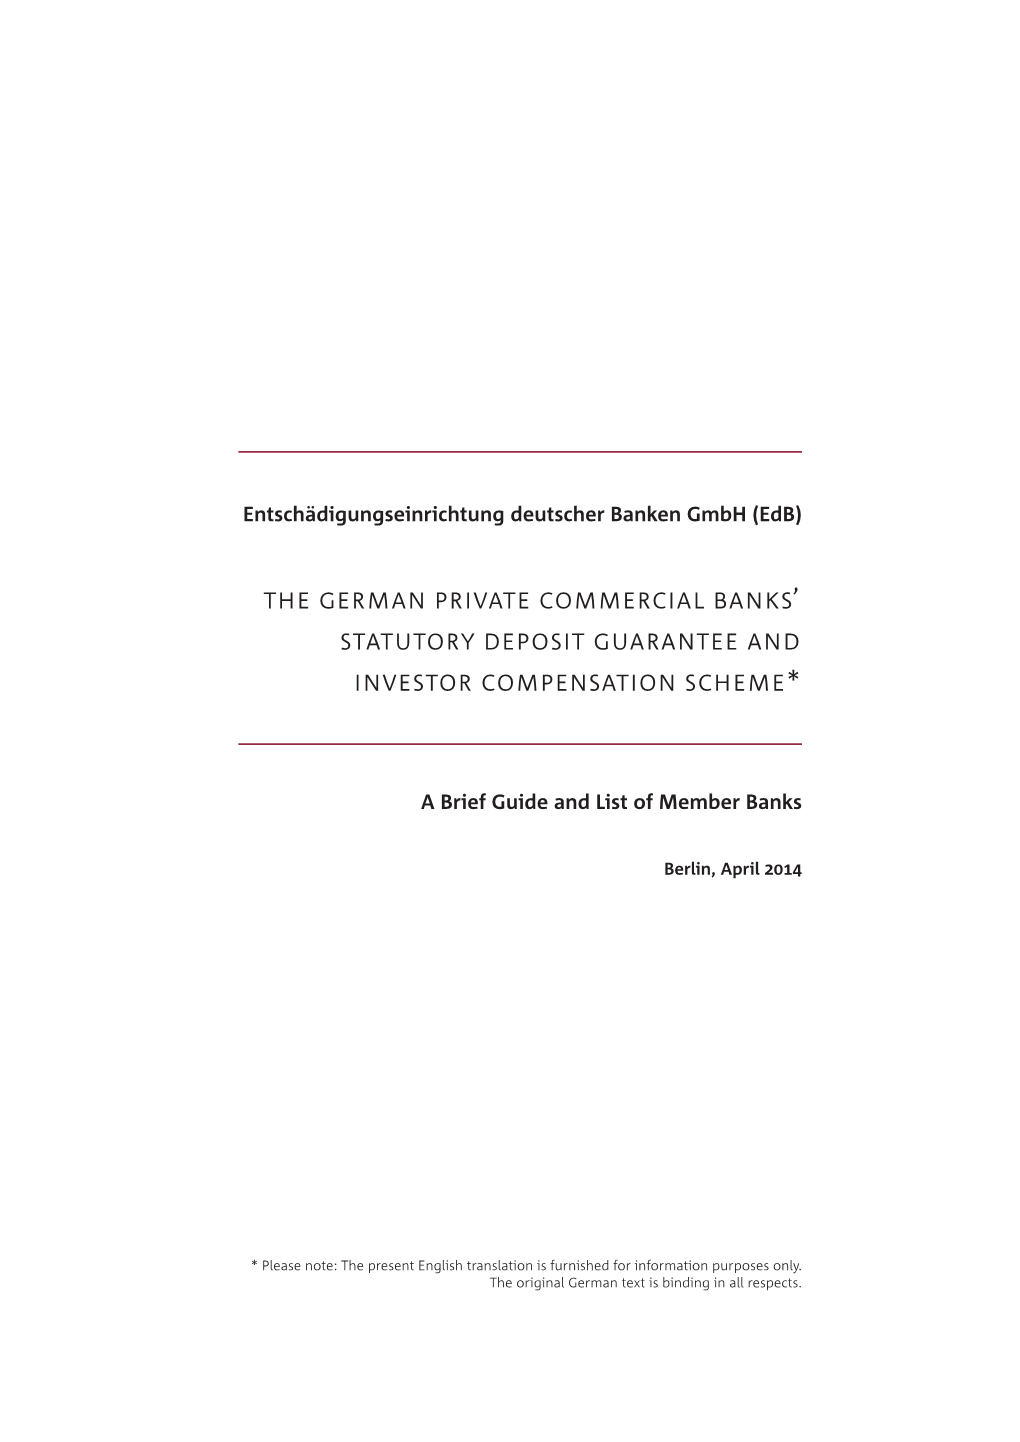 The German Private Commercial Banks' Statutory Deposit Guarantee And